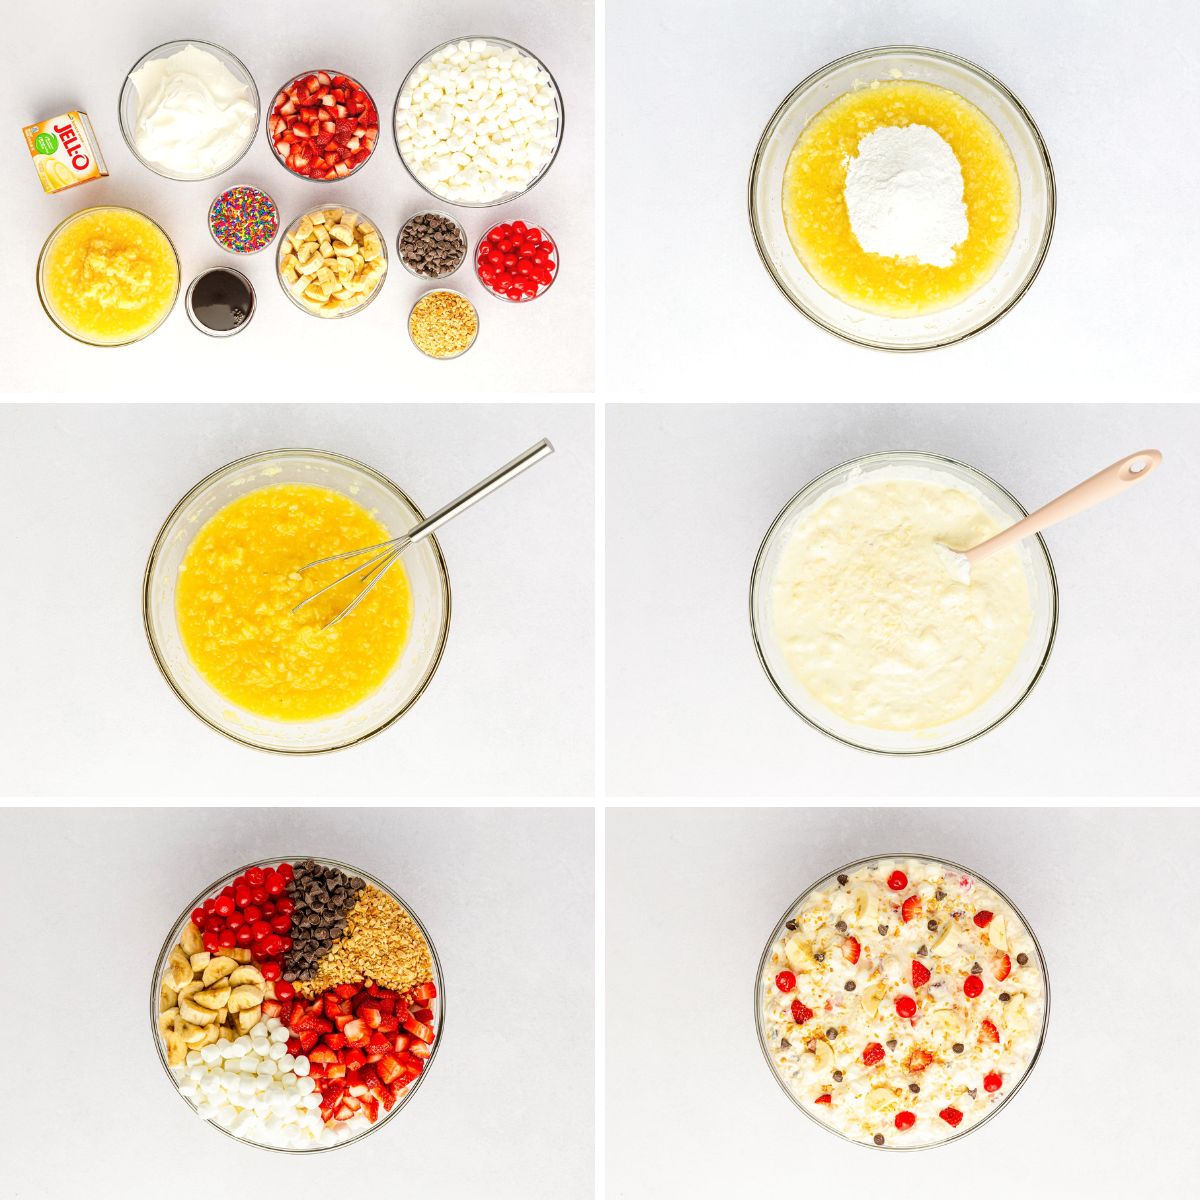 Step by step photo collage showing how to make banana split salad.